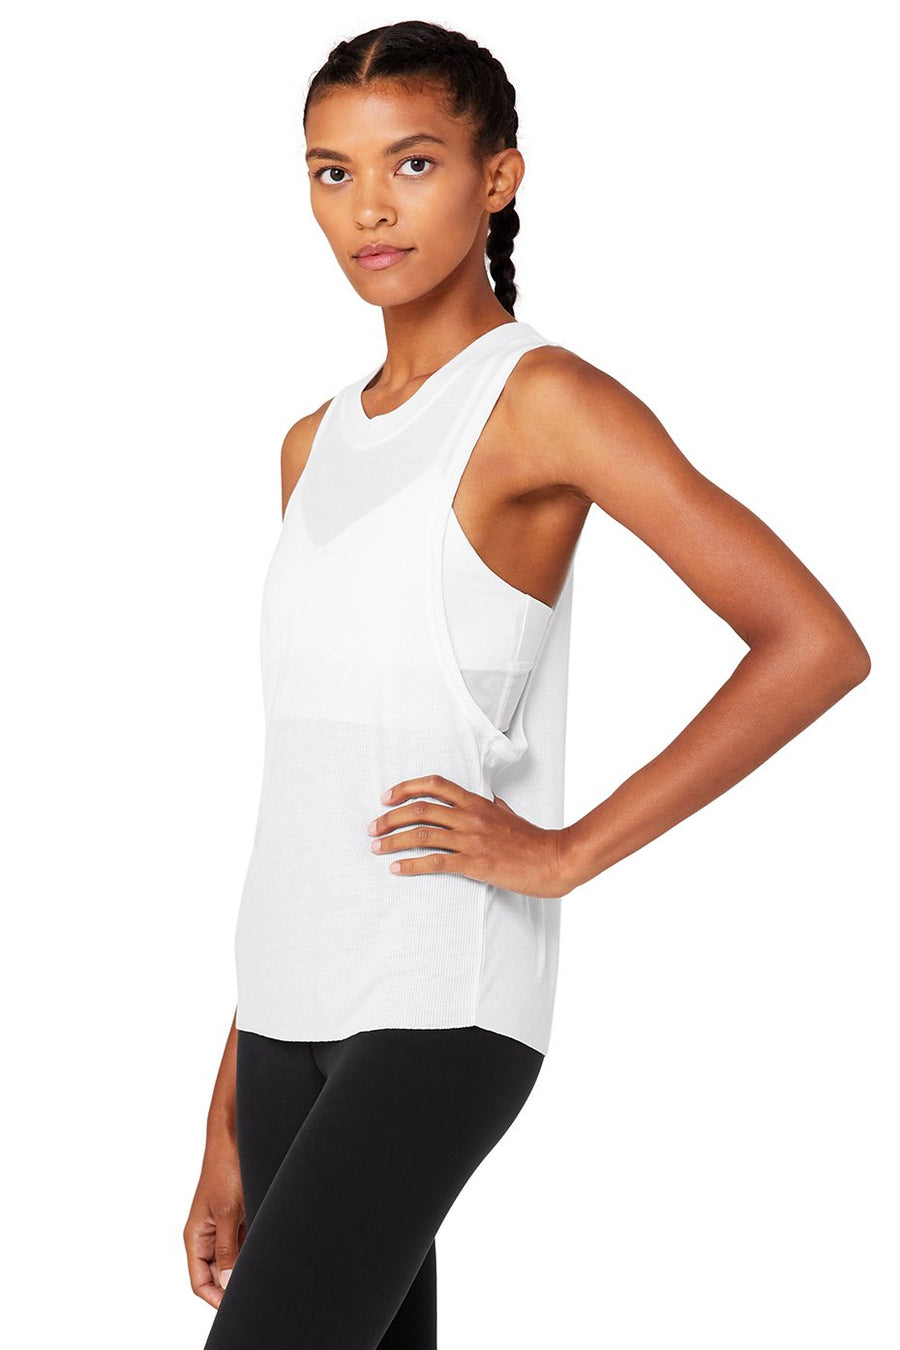 IN STORE ONLY - Heat Wave Tank - White - Shop Yu Fashion